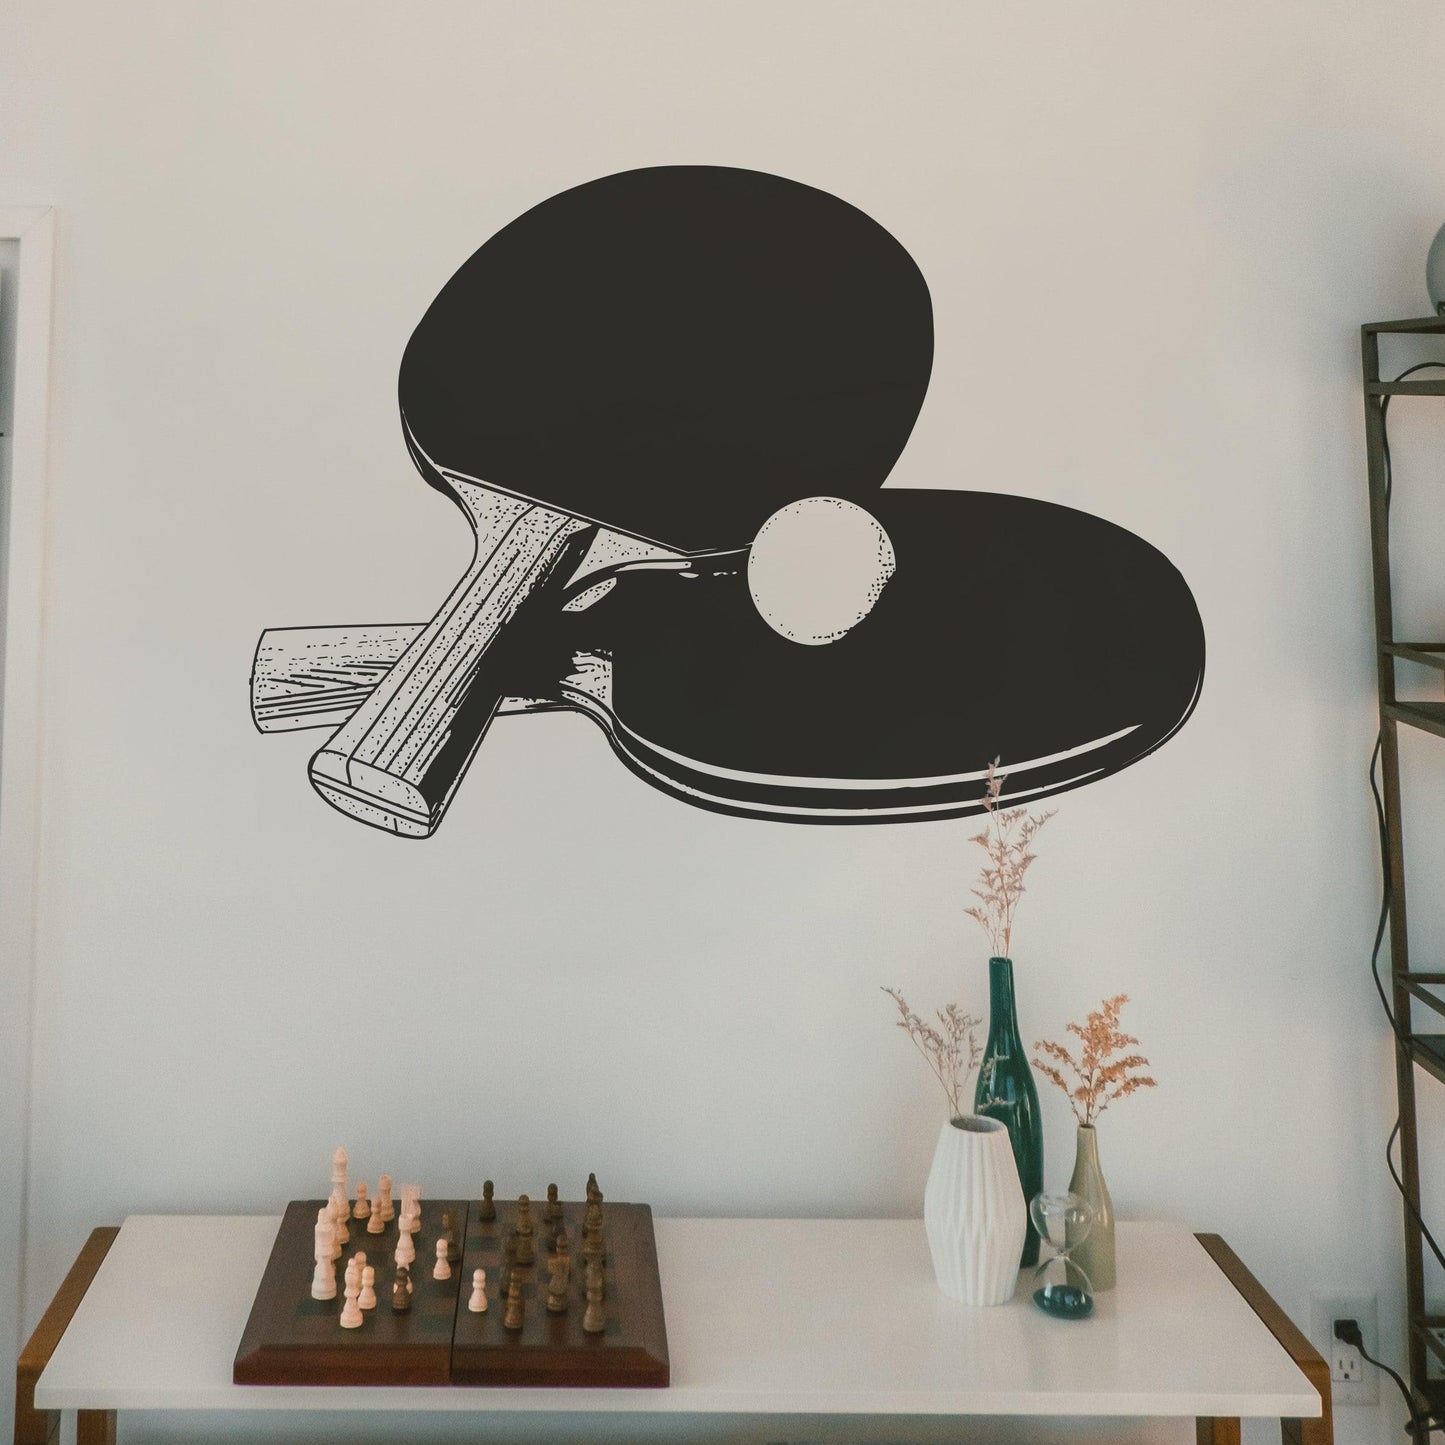 Ping Pong Paddles Wall Decal Sticker. #5110